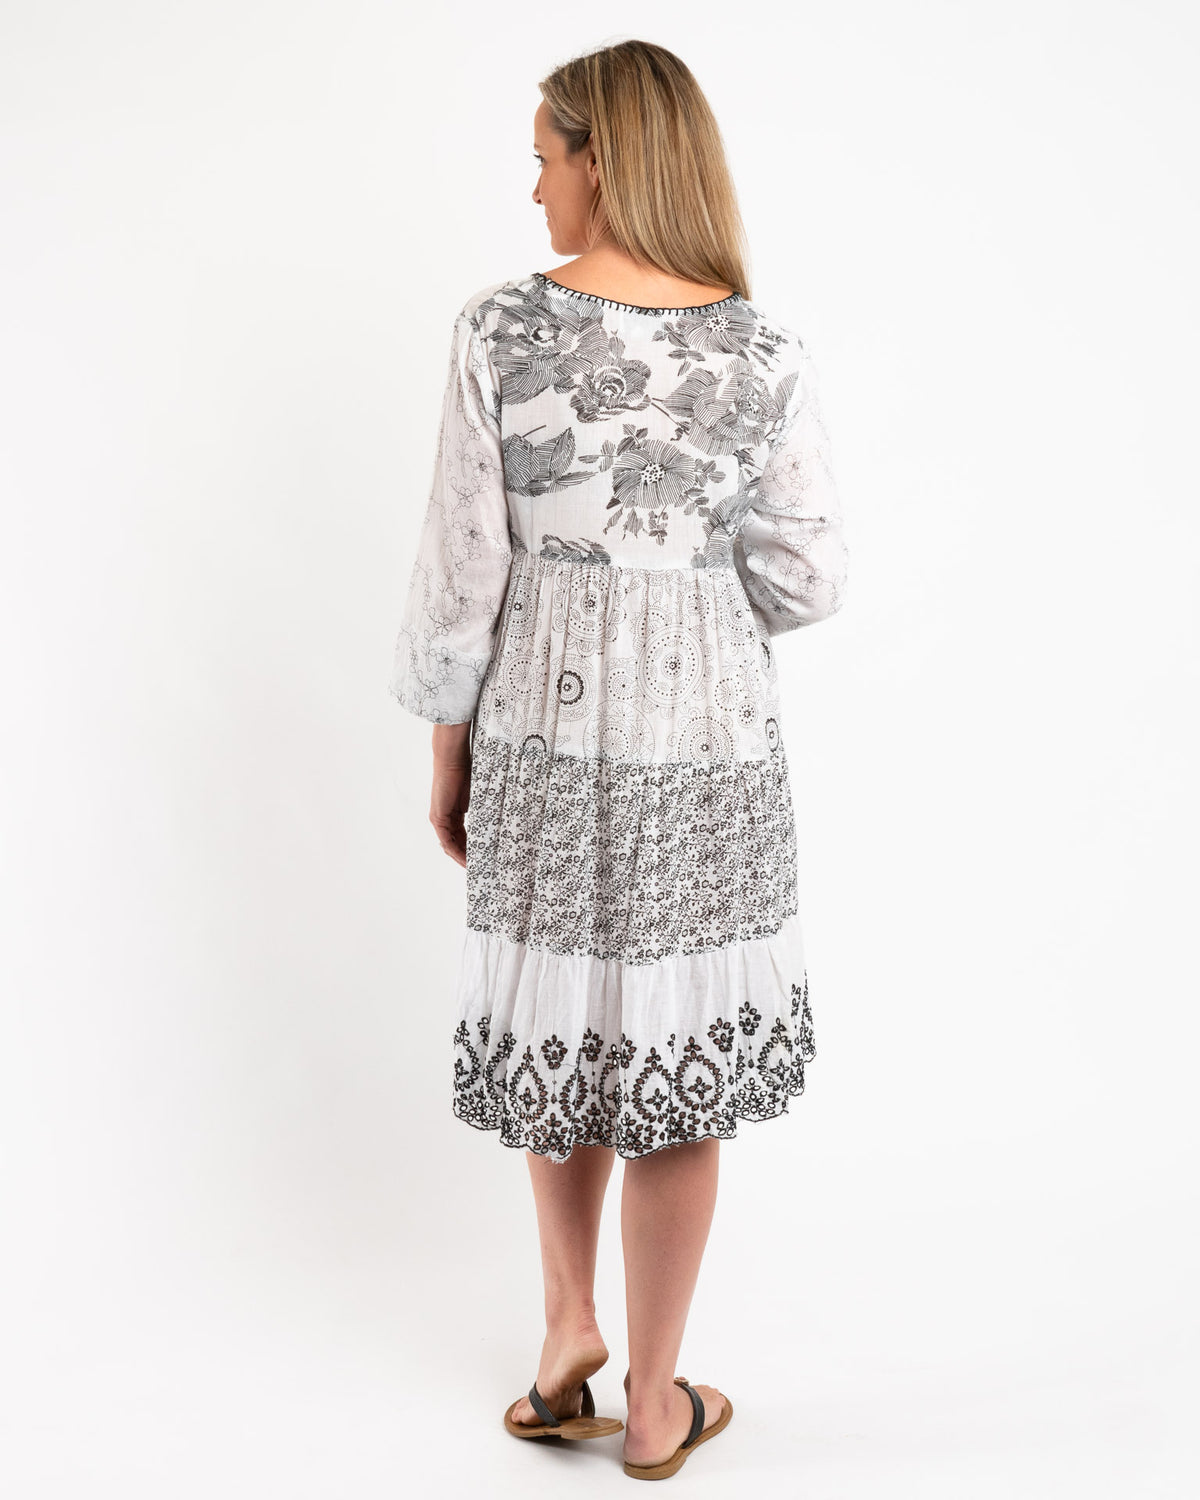 Gypsy Style Black and White Panel Dress